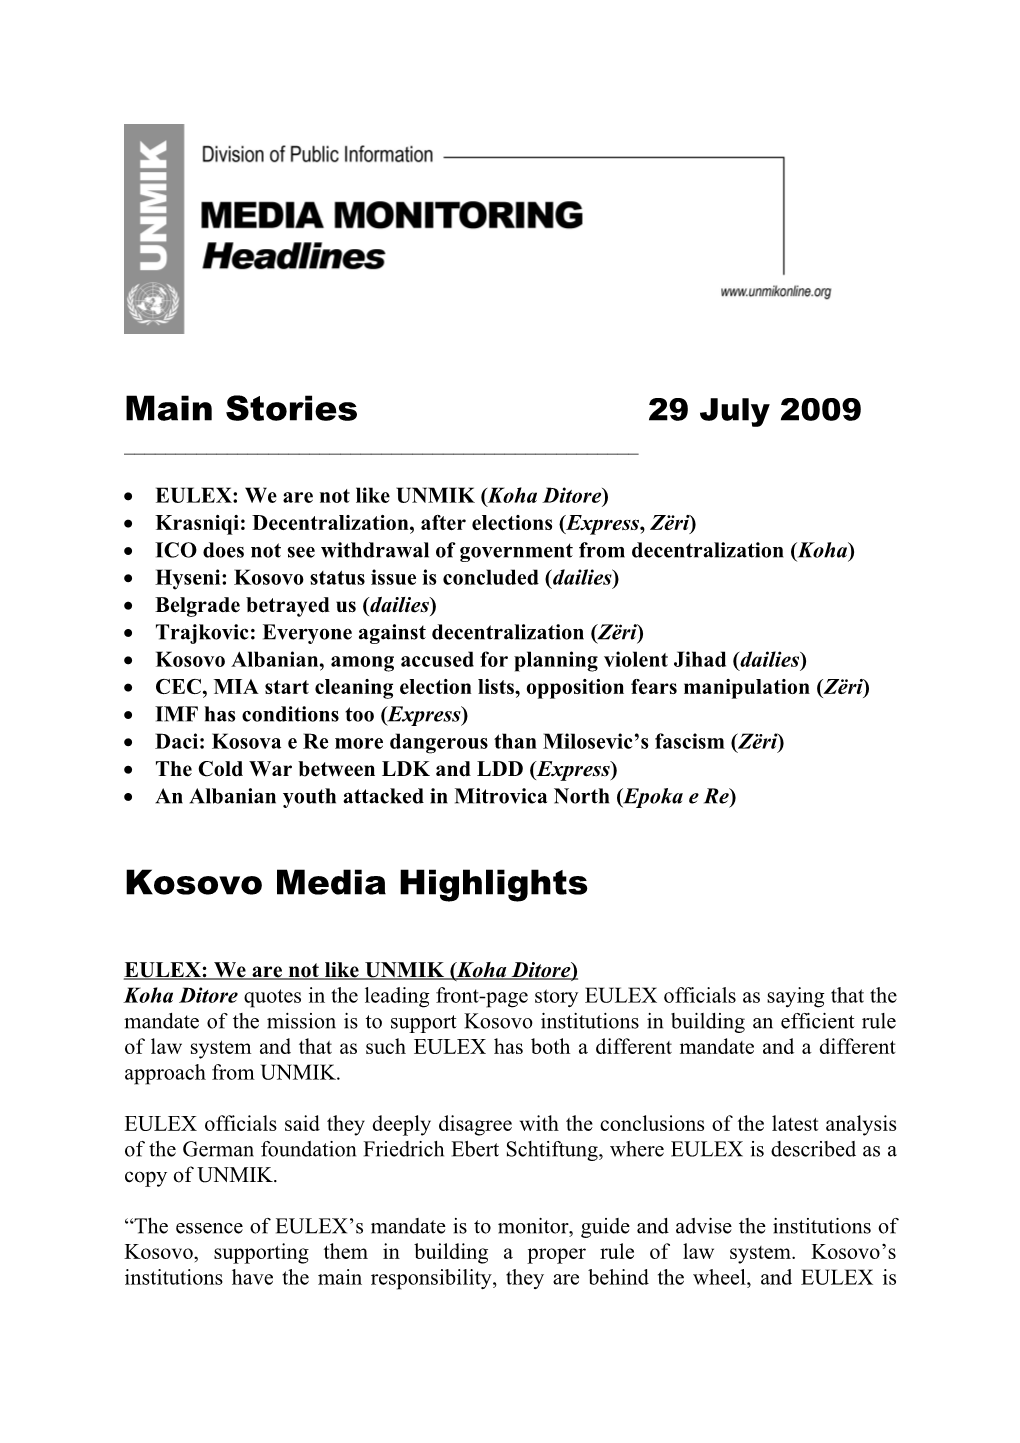 Main Stories 29July 2009